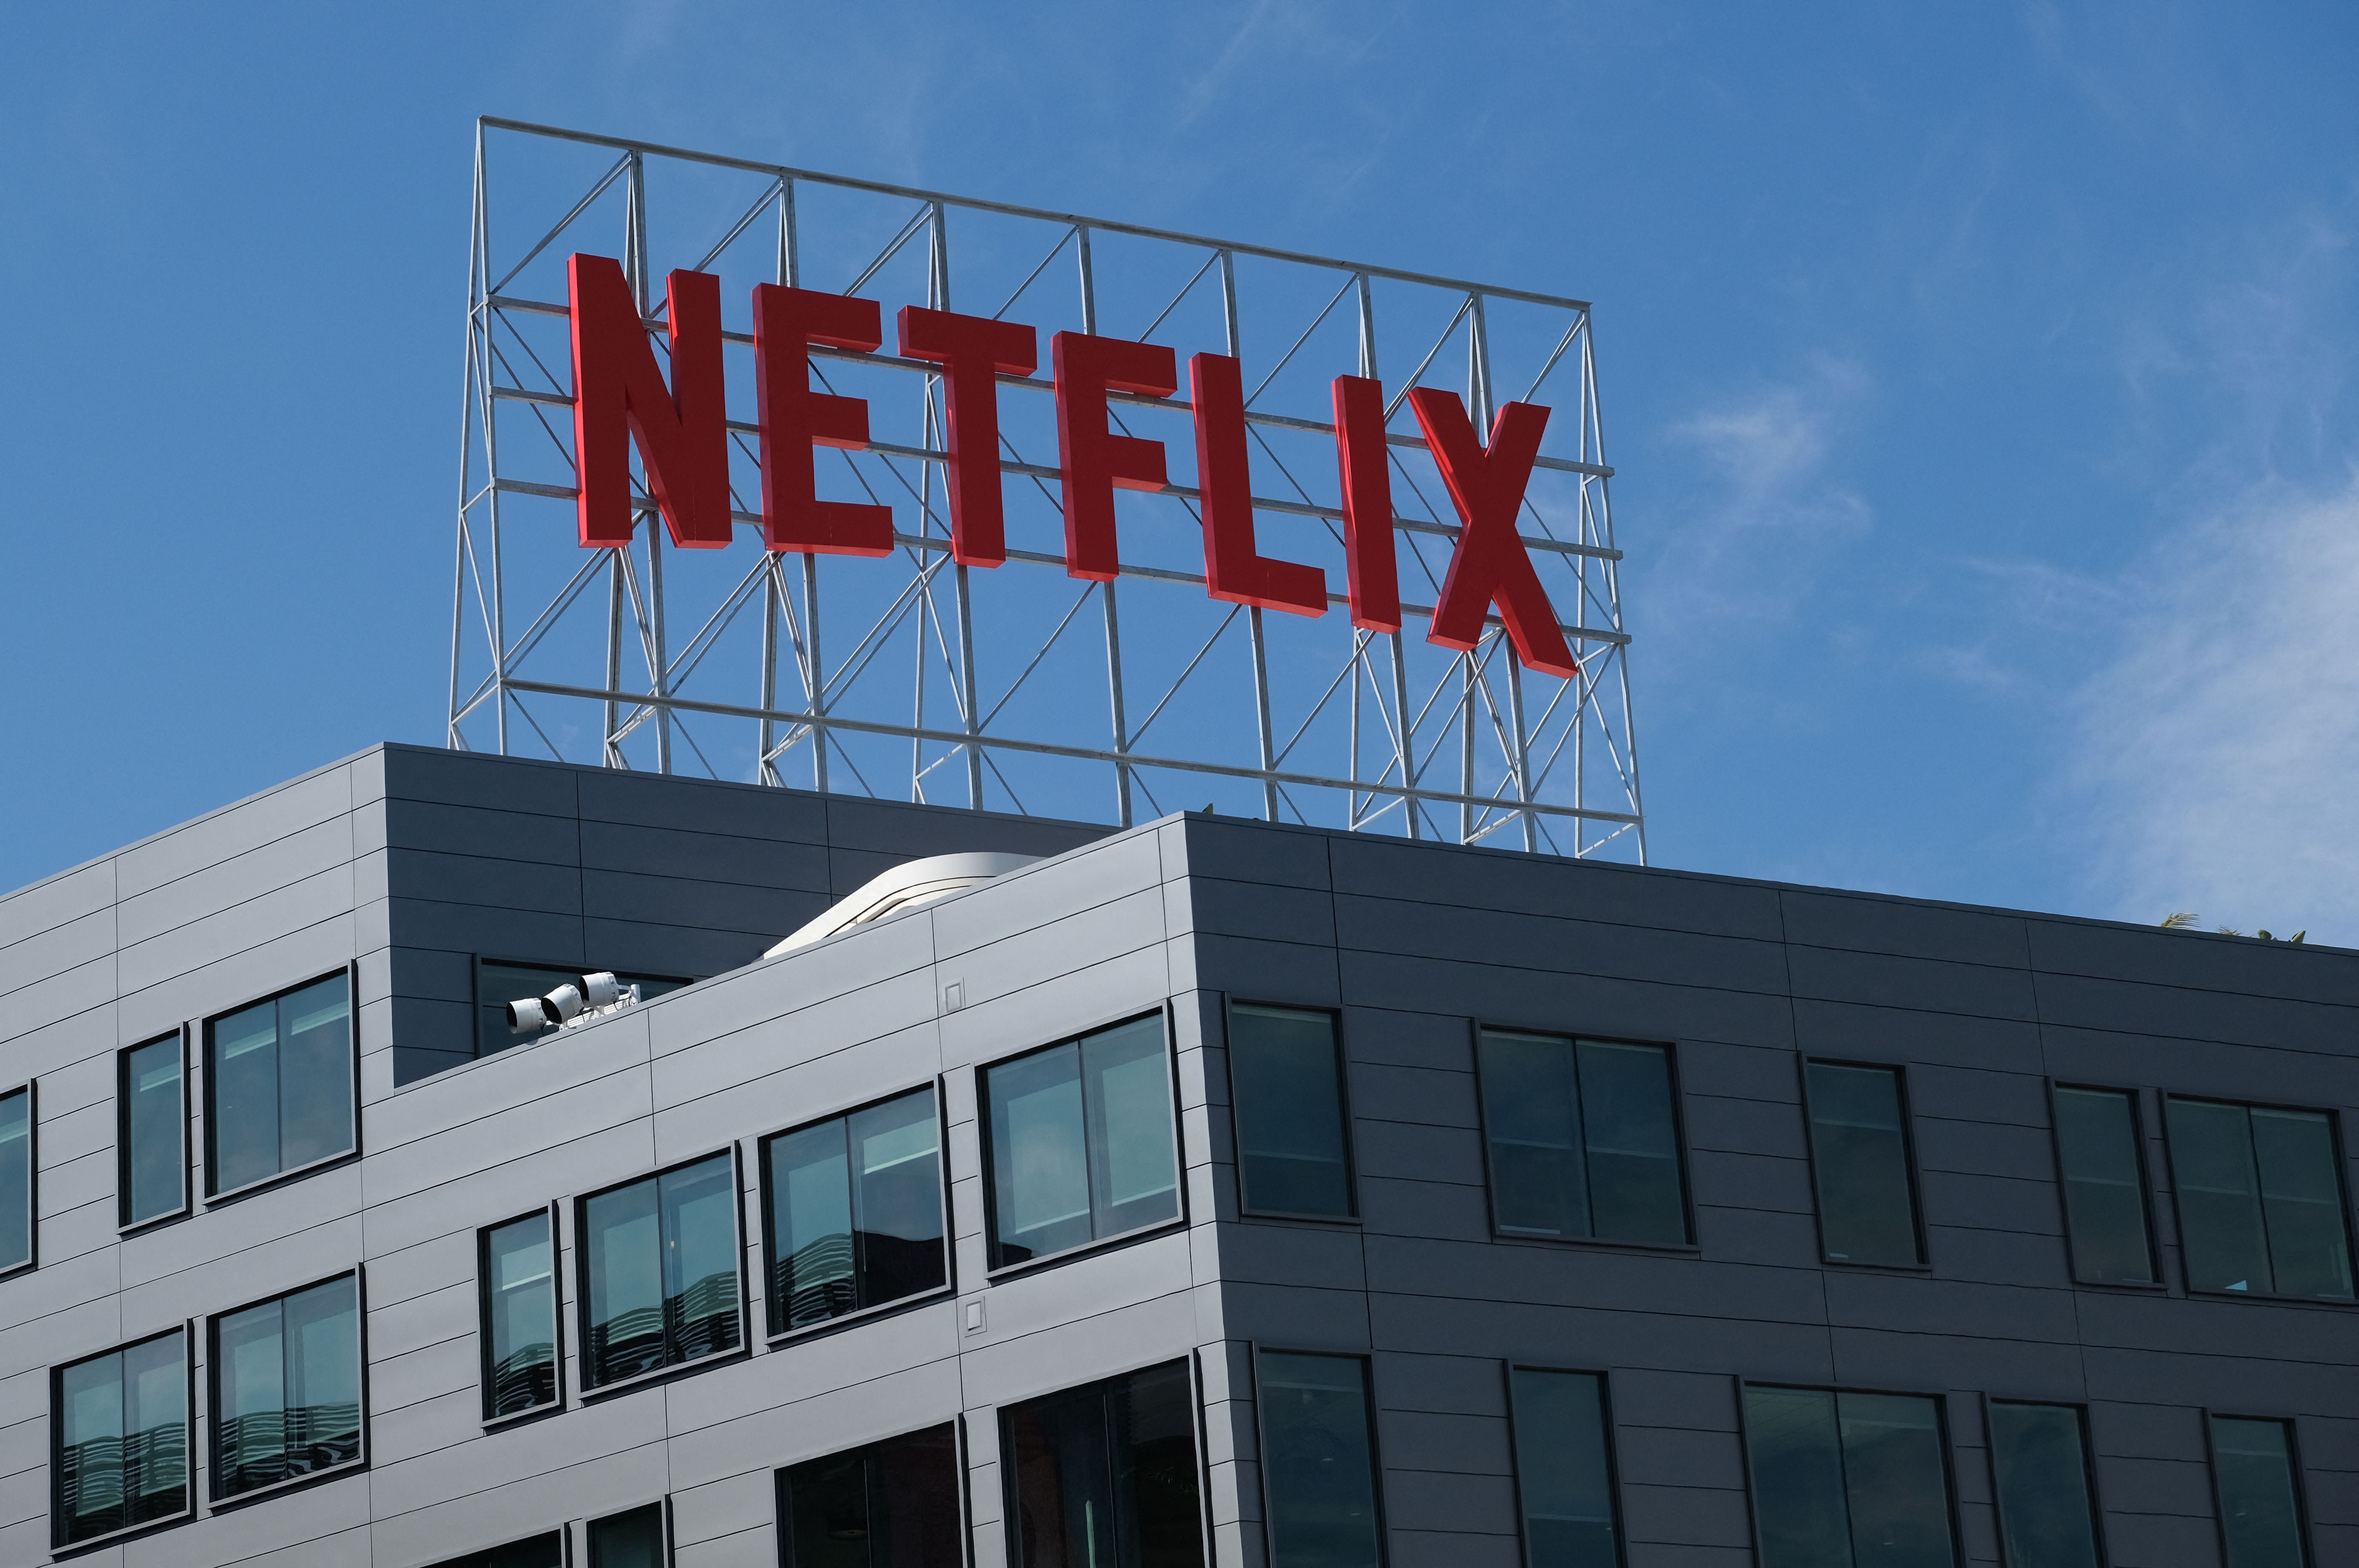 A sign above a building featuring the Netflix logo.